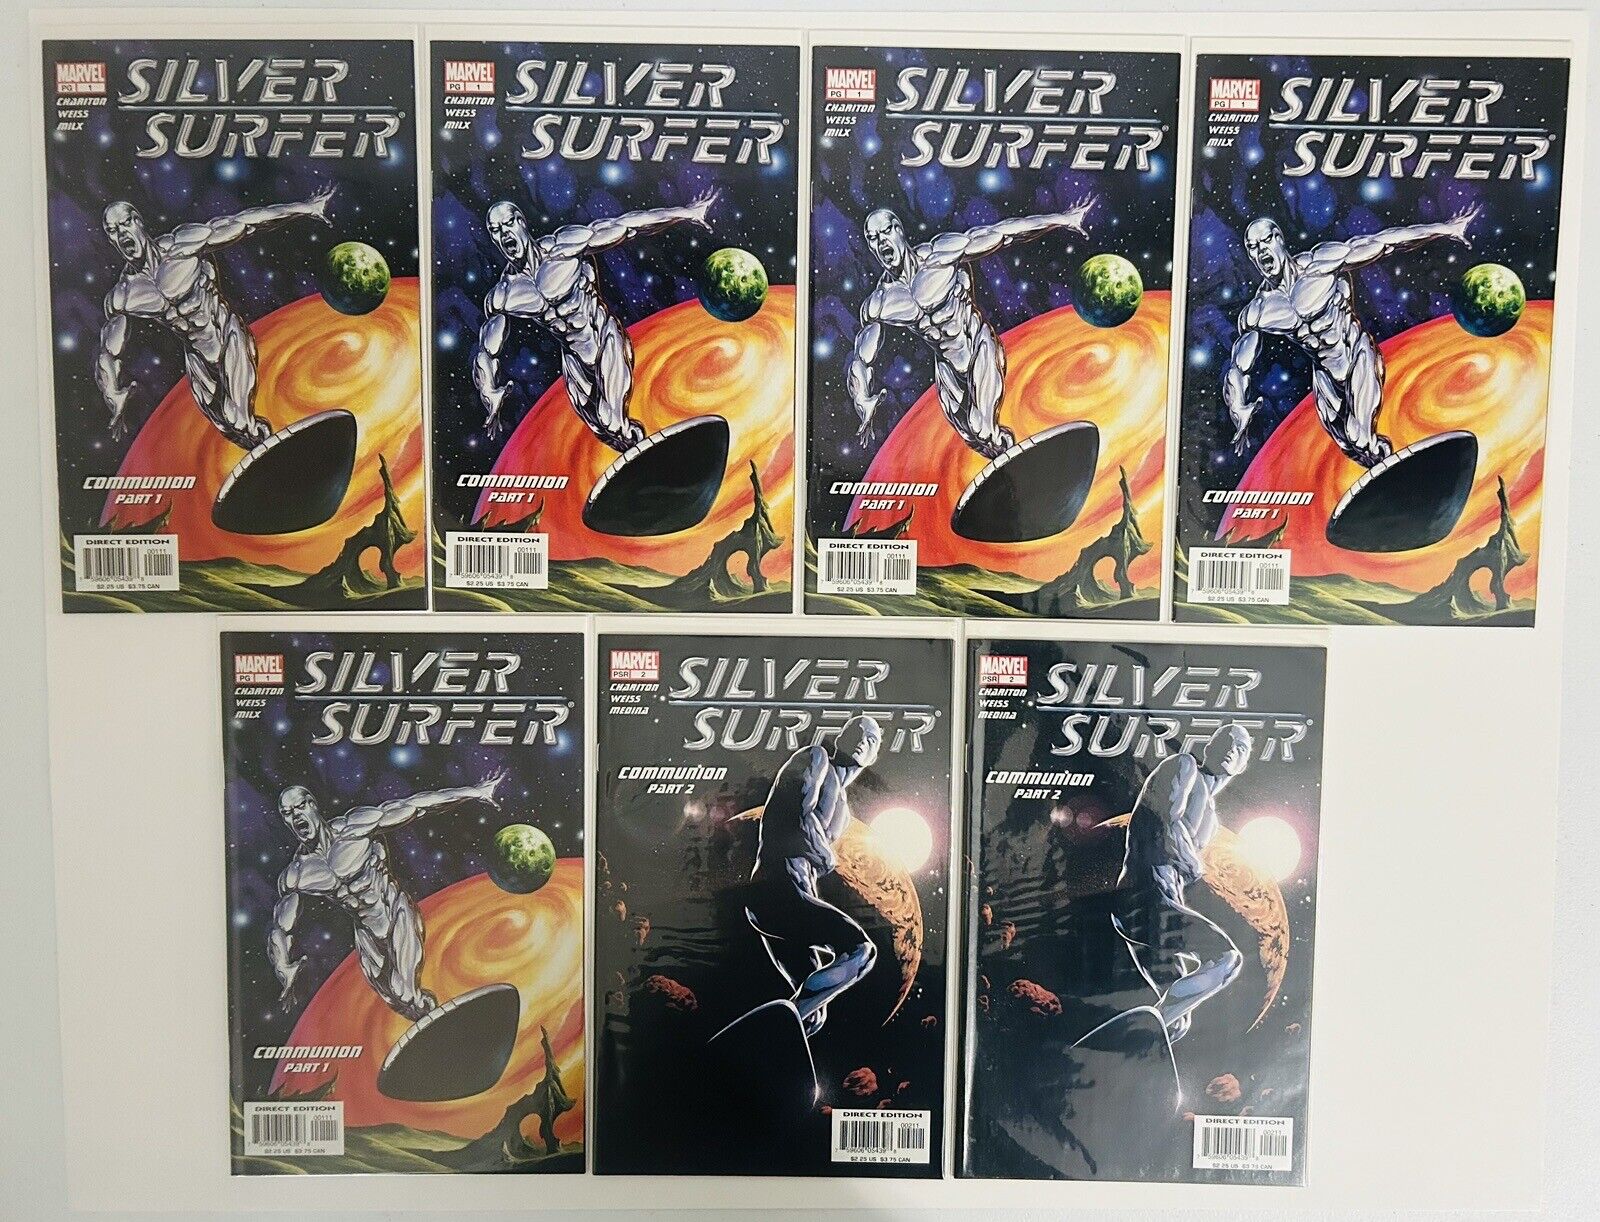 Silver Surfer 5 copies of #1 and 2 copies of #2 - 2003 \'Communion\' Pts. 1, 2